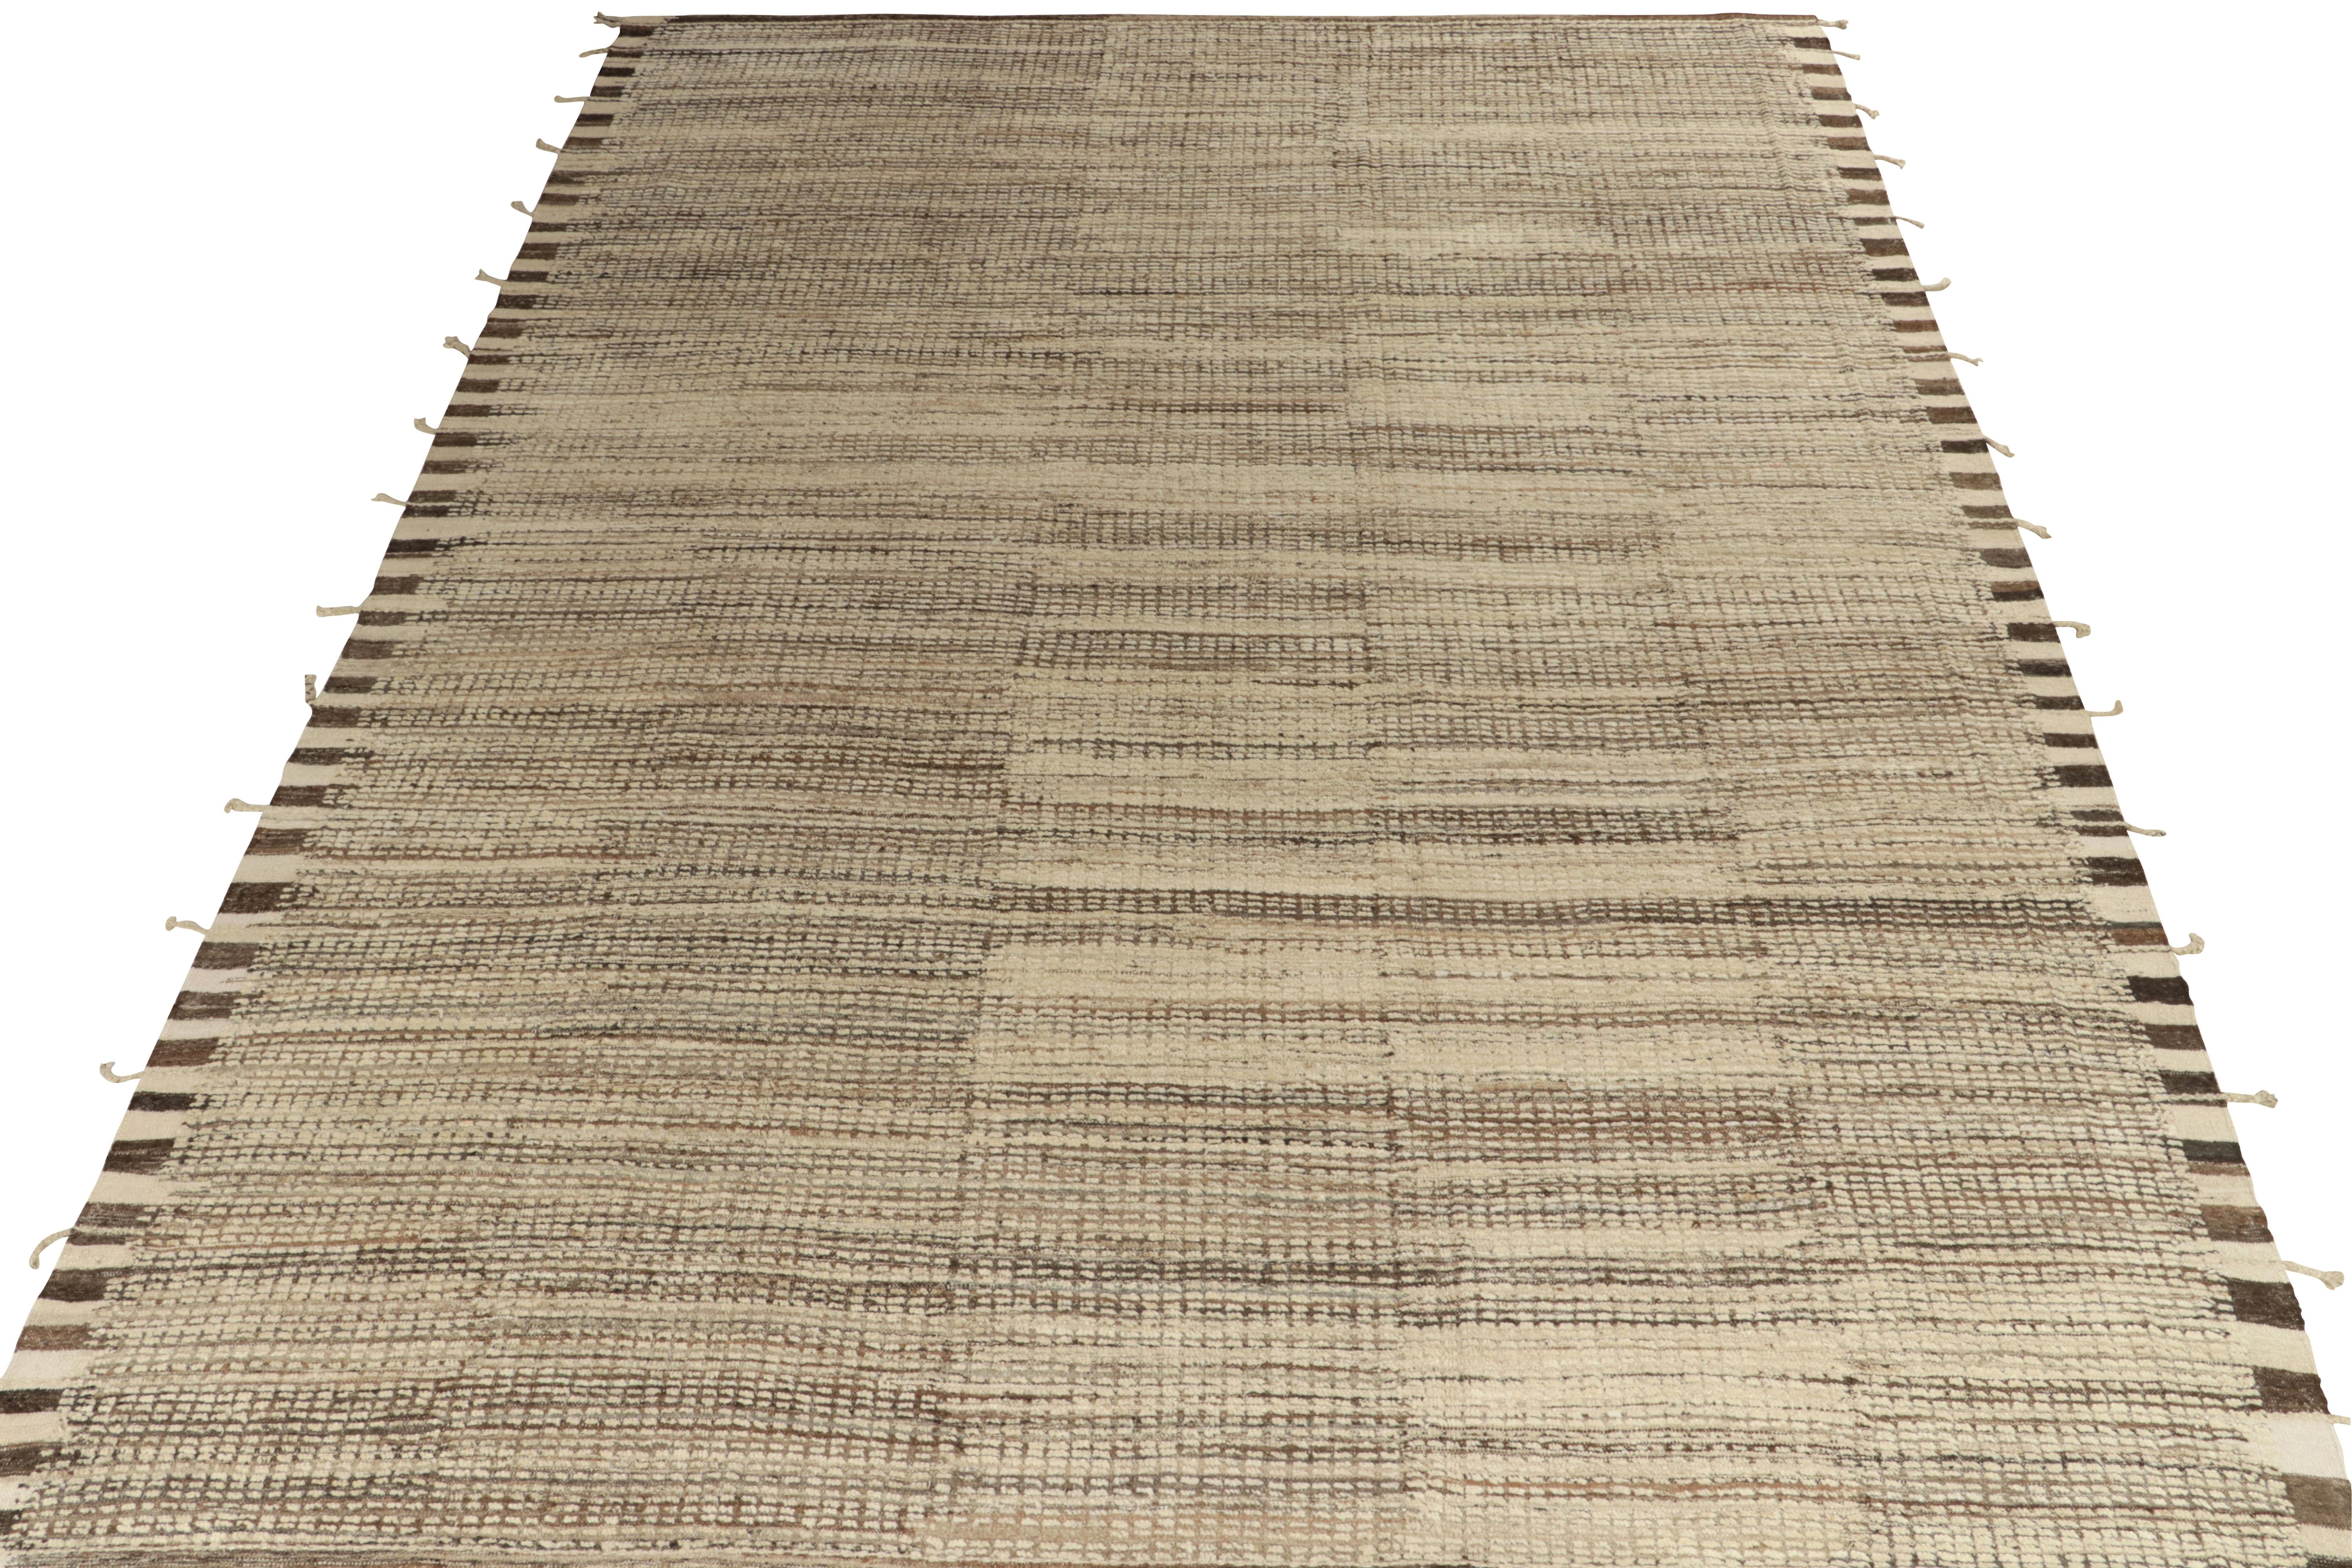 Rug & Kilim presents a contemporary take on Moroccan style with this 10x13 hand-knotted piece of exceptional texture. The rug enjoys a comfortable high-low appeal in forgiving beige brown black striations concluding to fringes on the borders for